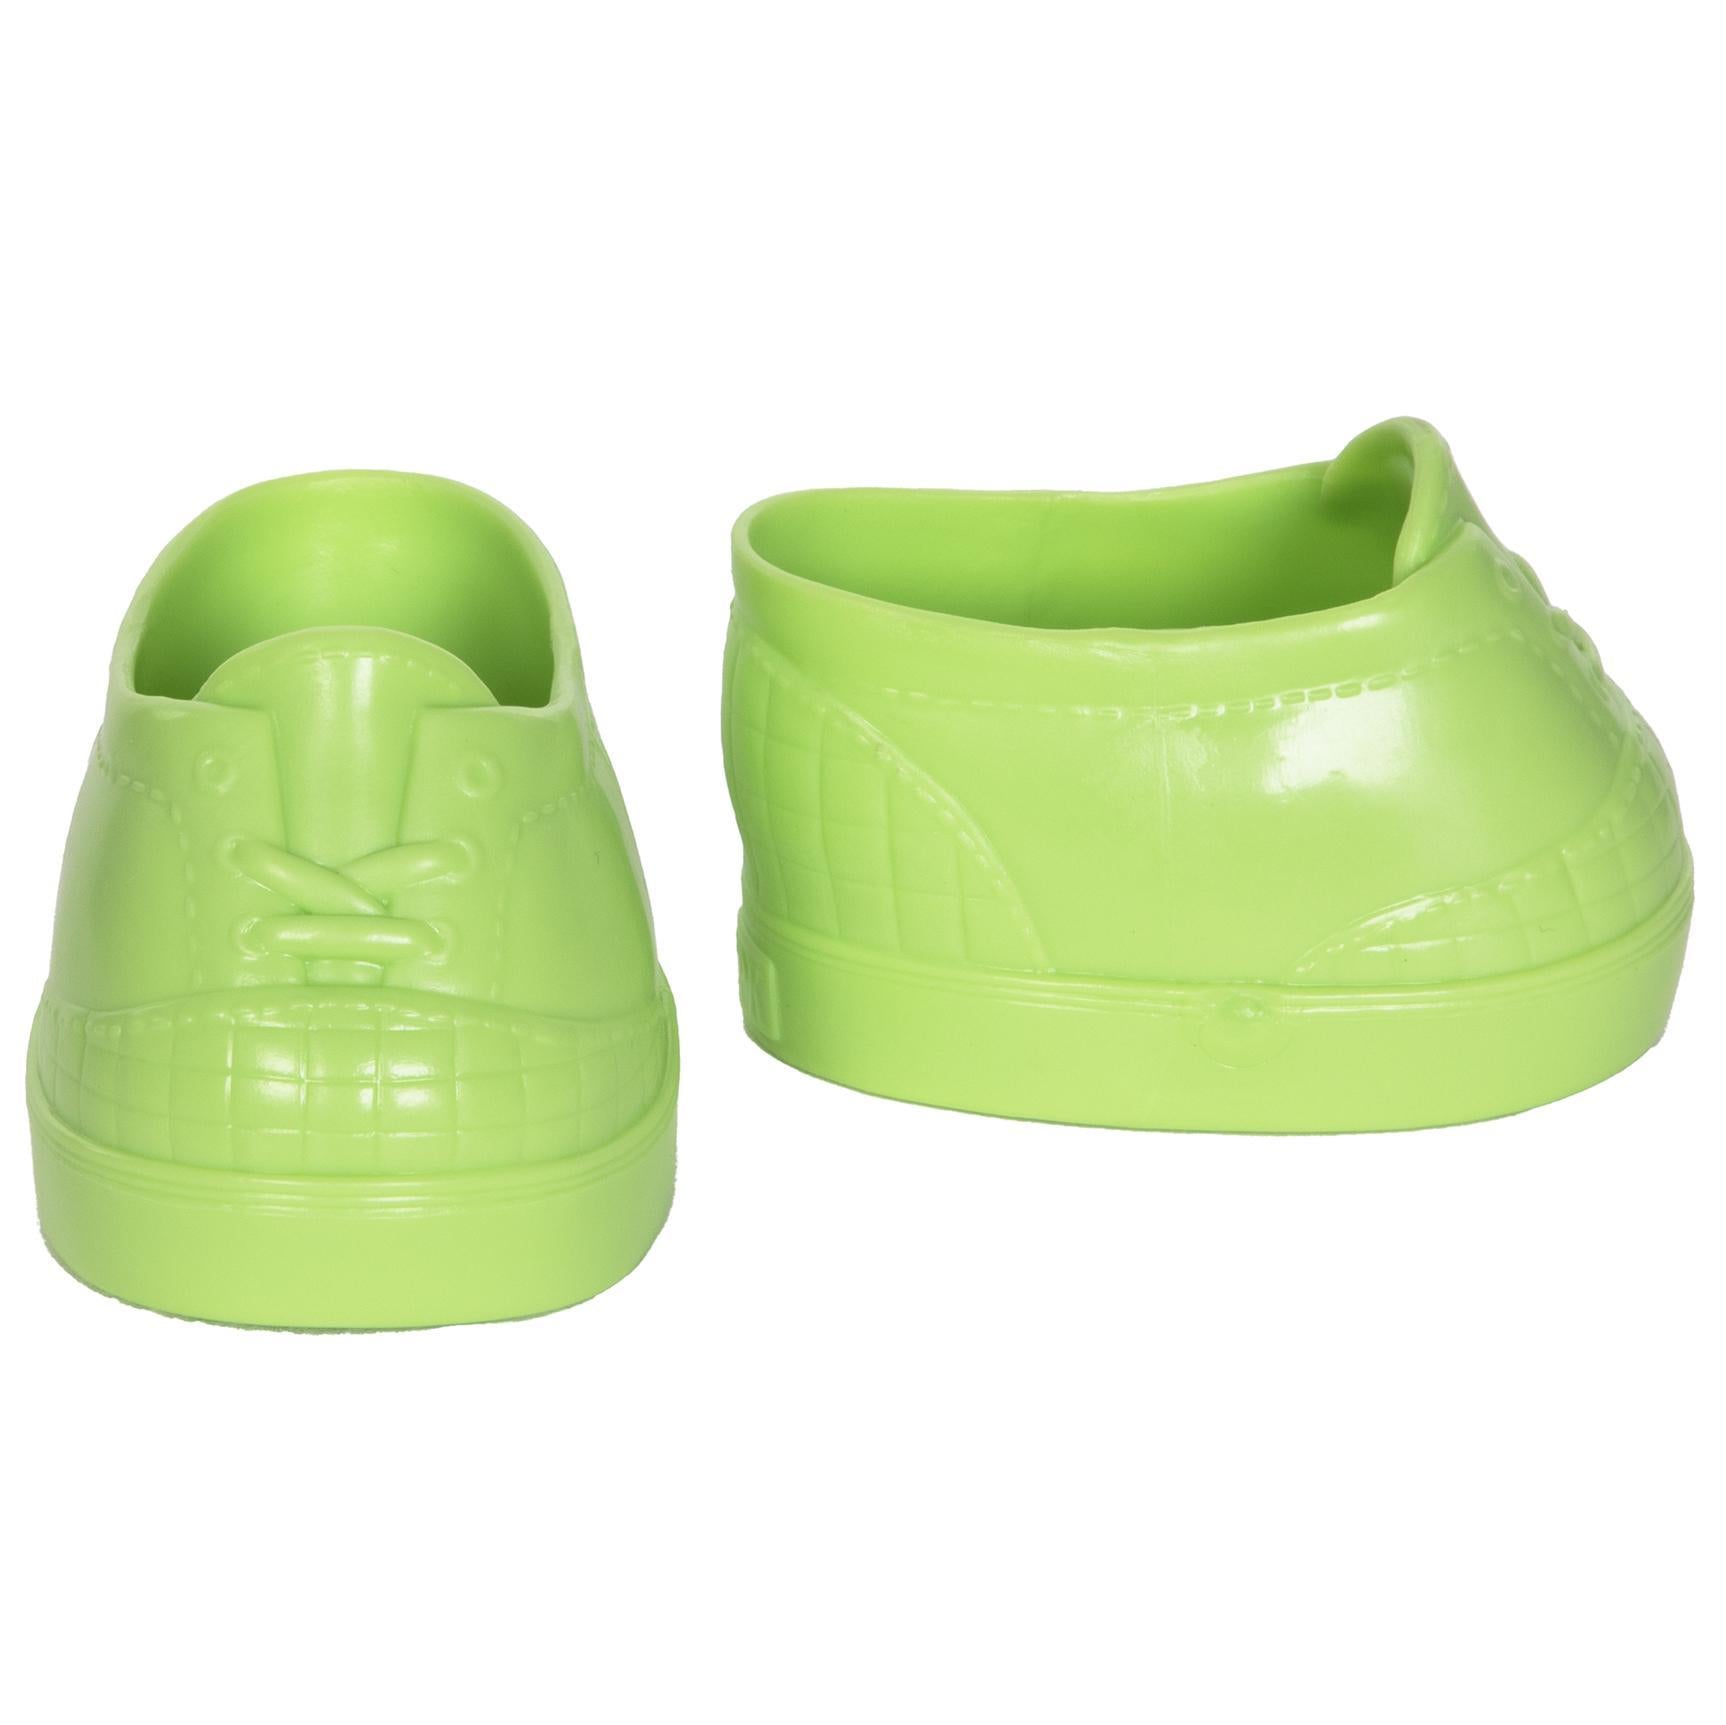 CPK Shoes Tennis Sneakers Green Fits 14-20" Cabbage Patch Kids